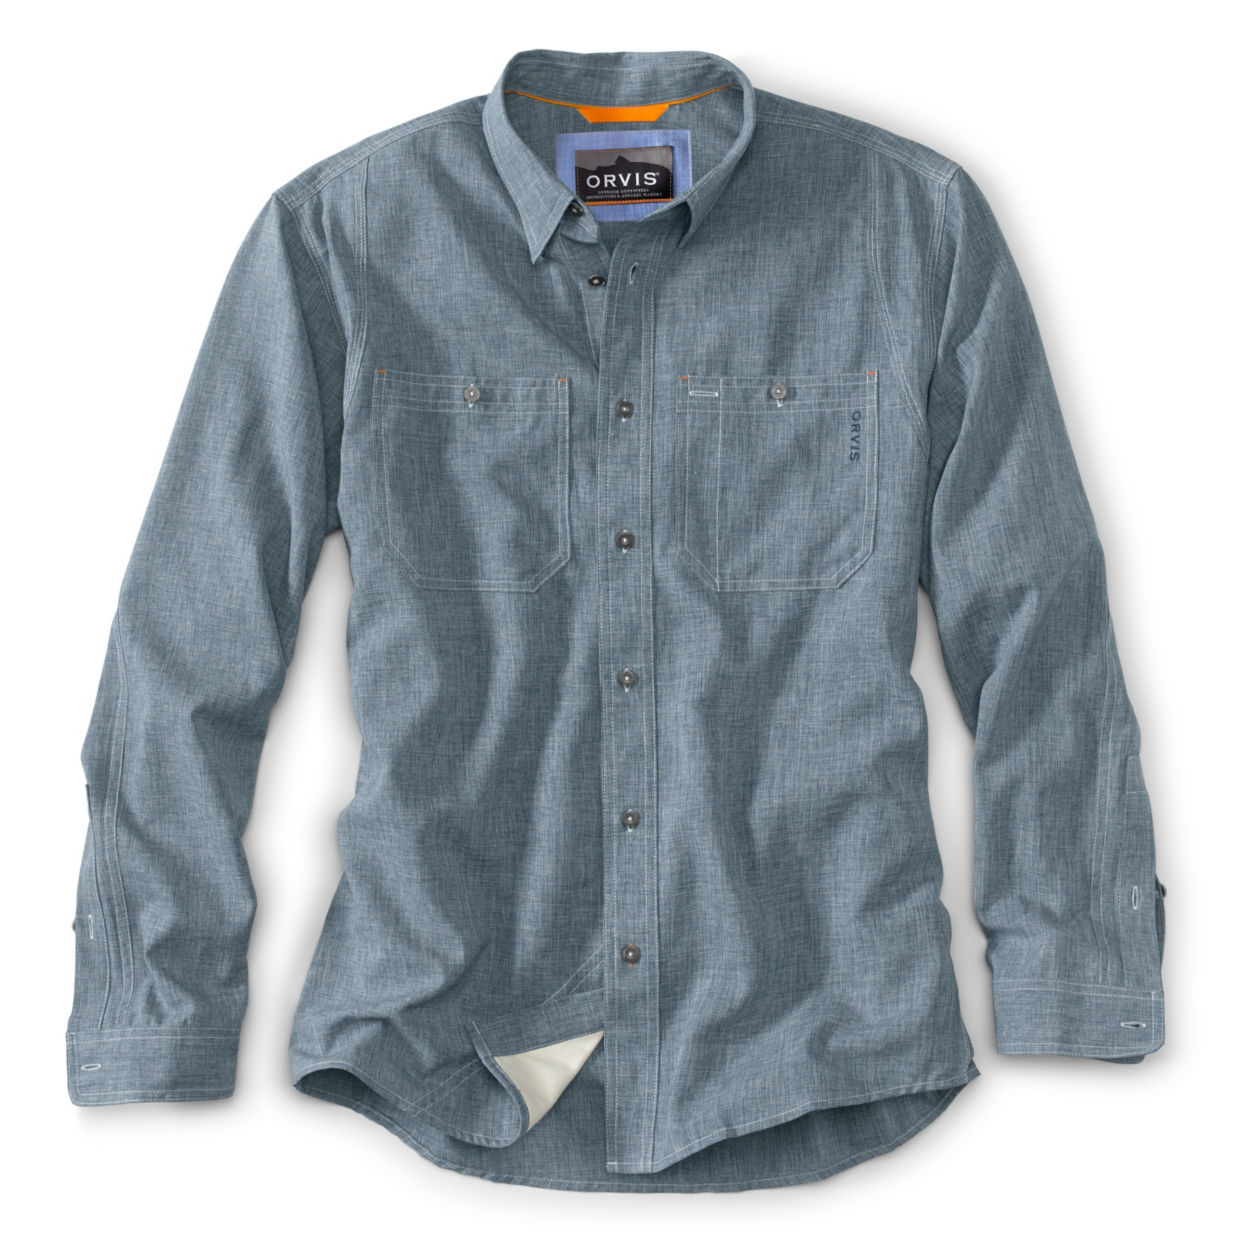 Men's Tech Performance Work Shirt Blue Chambray Size Medium Polyester/Recycled Materials Orvis